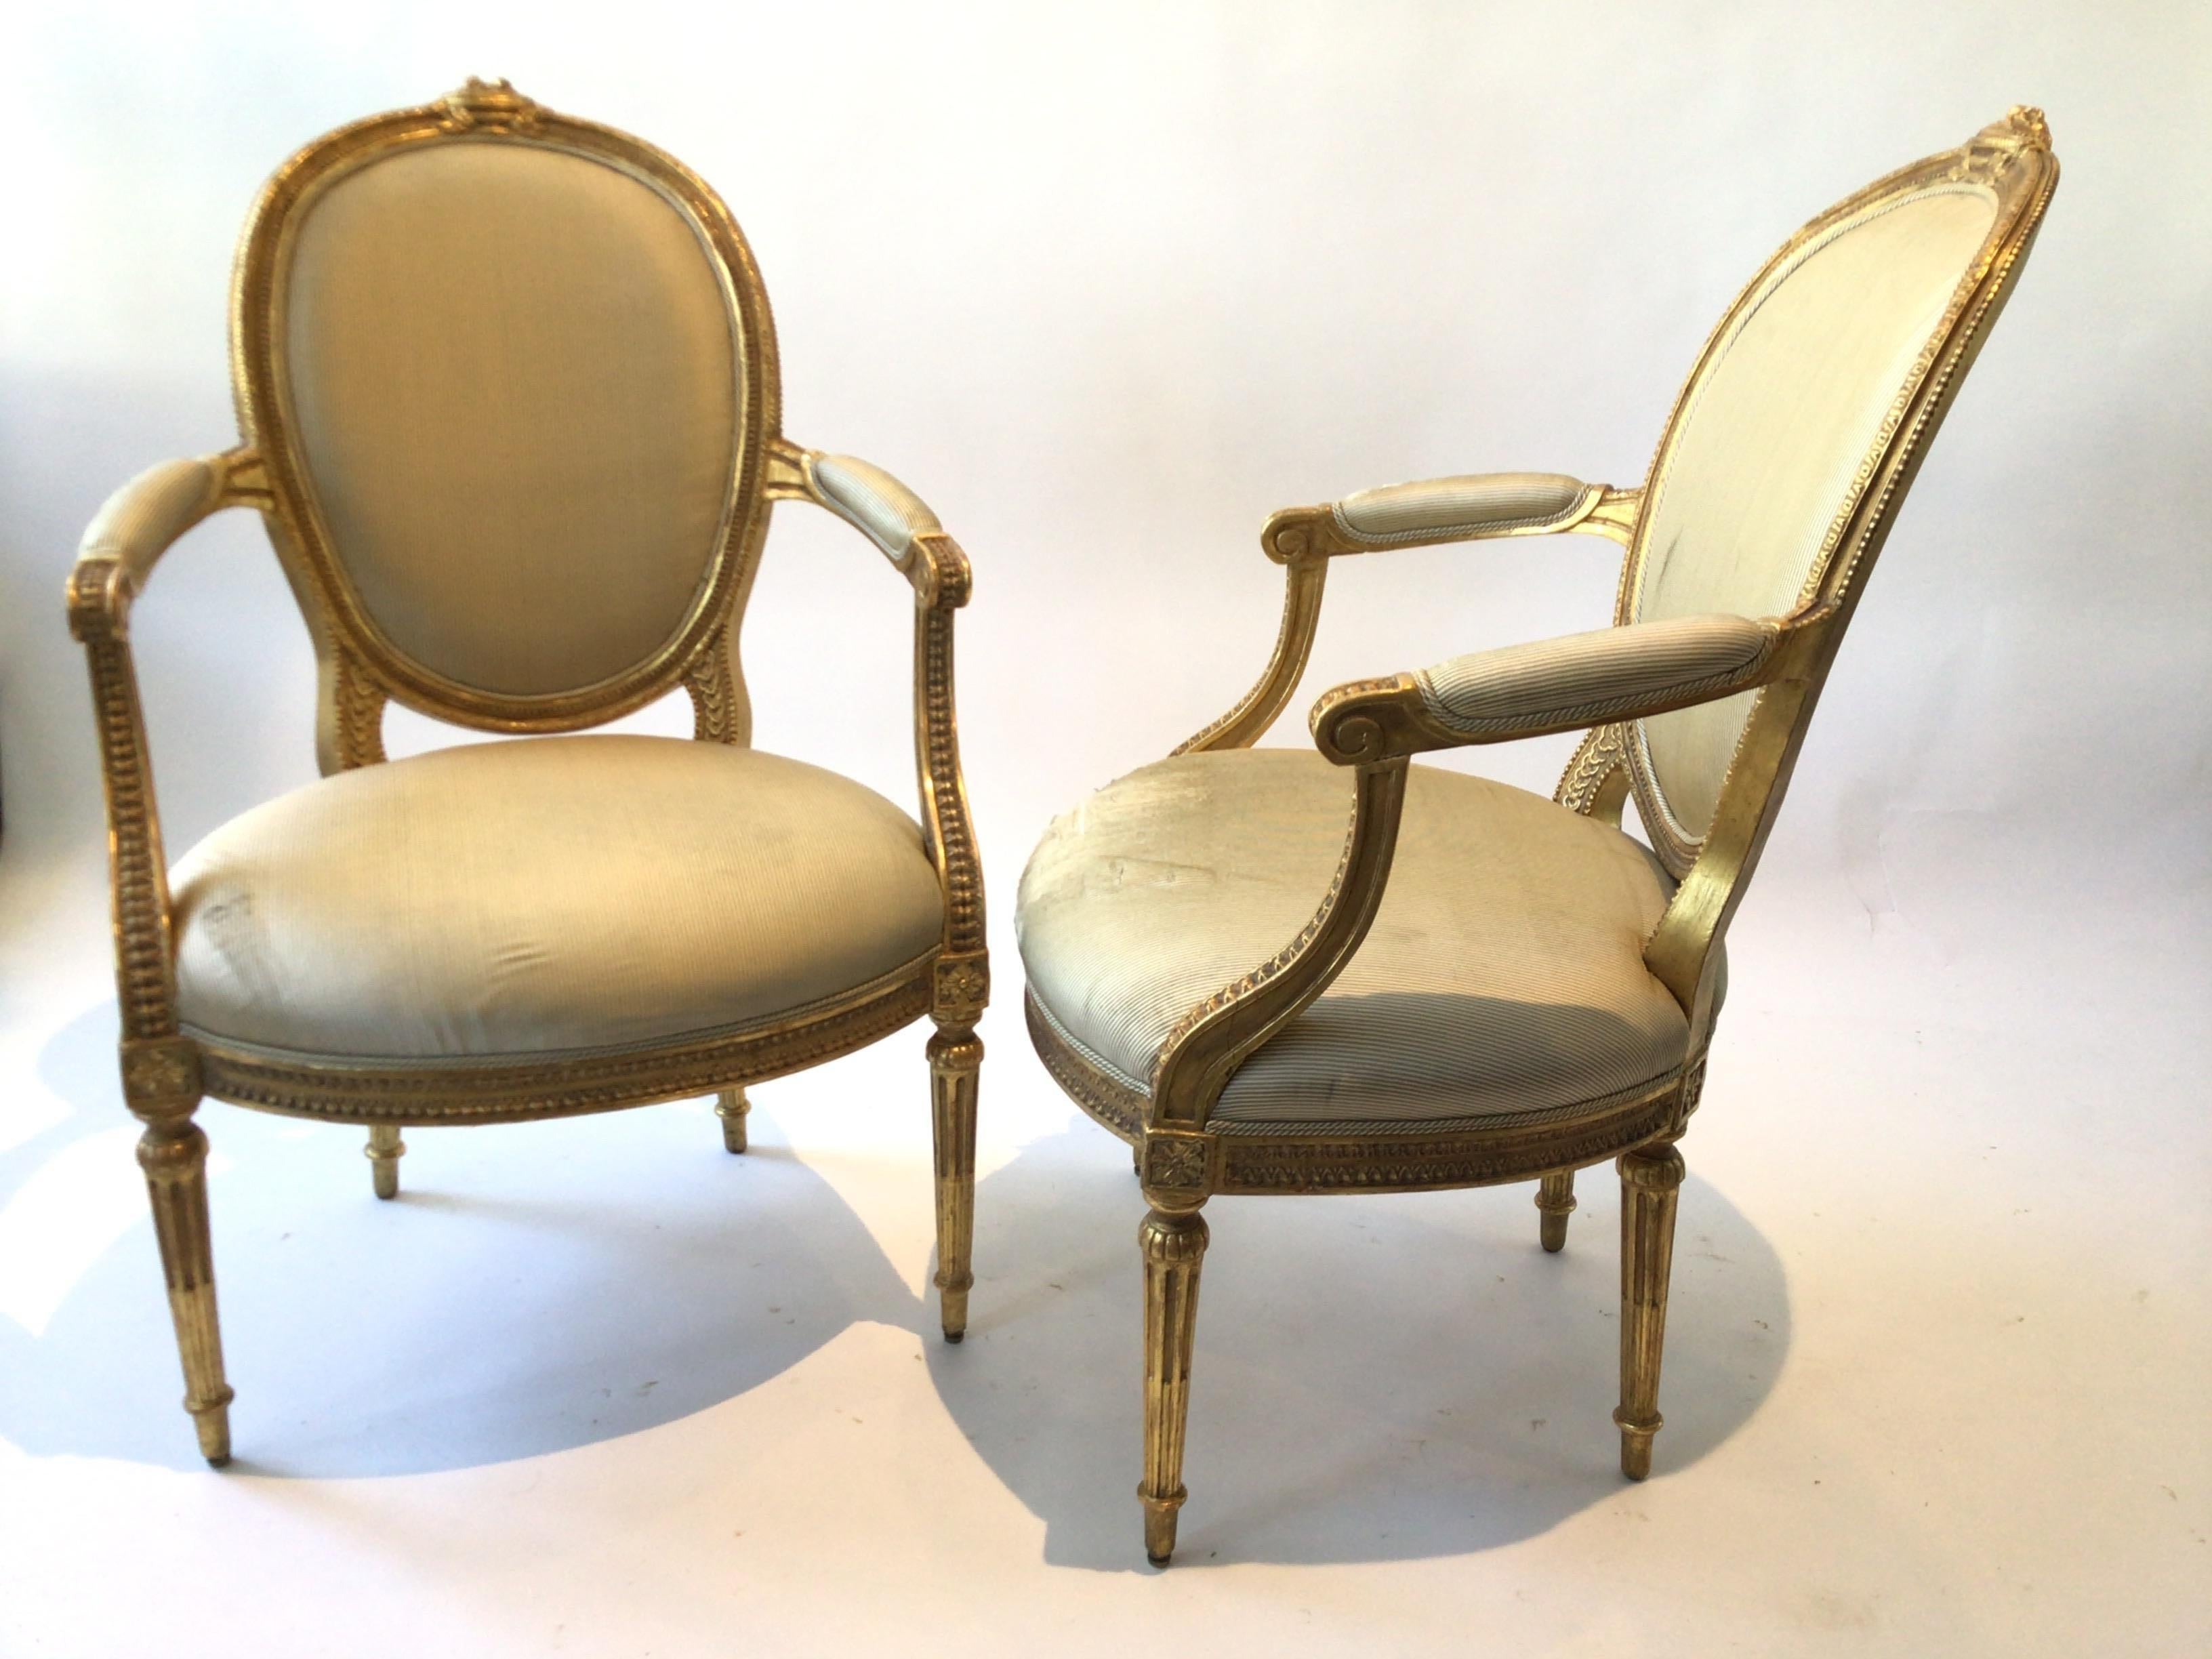 Pair of 1920s French gilt wood hand carved Louis XVI armchairs. Needs reupholstering. Purchased from a 15 million dollar Southampton home.